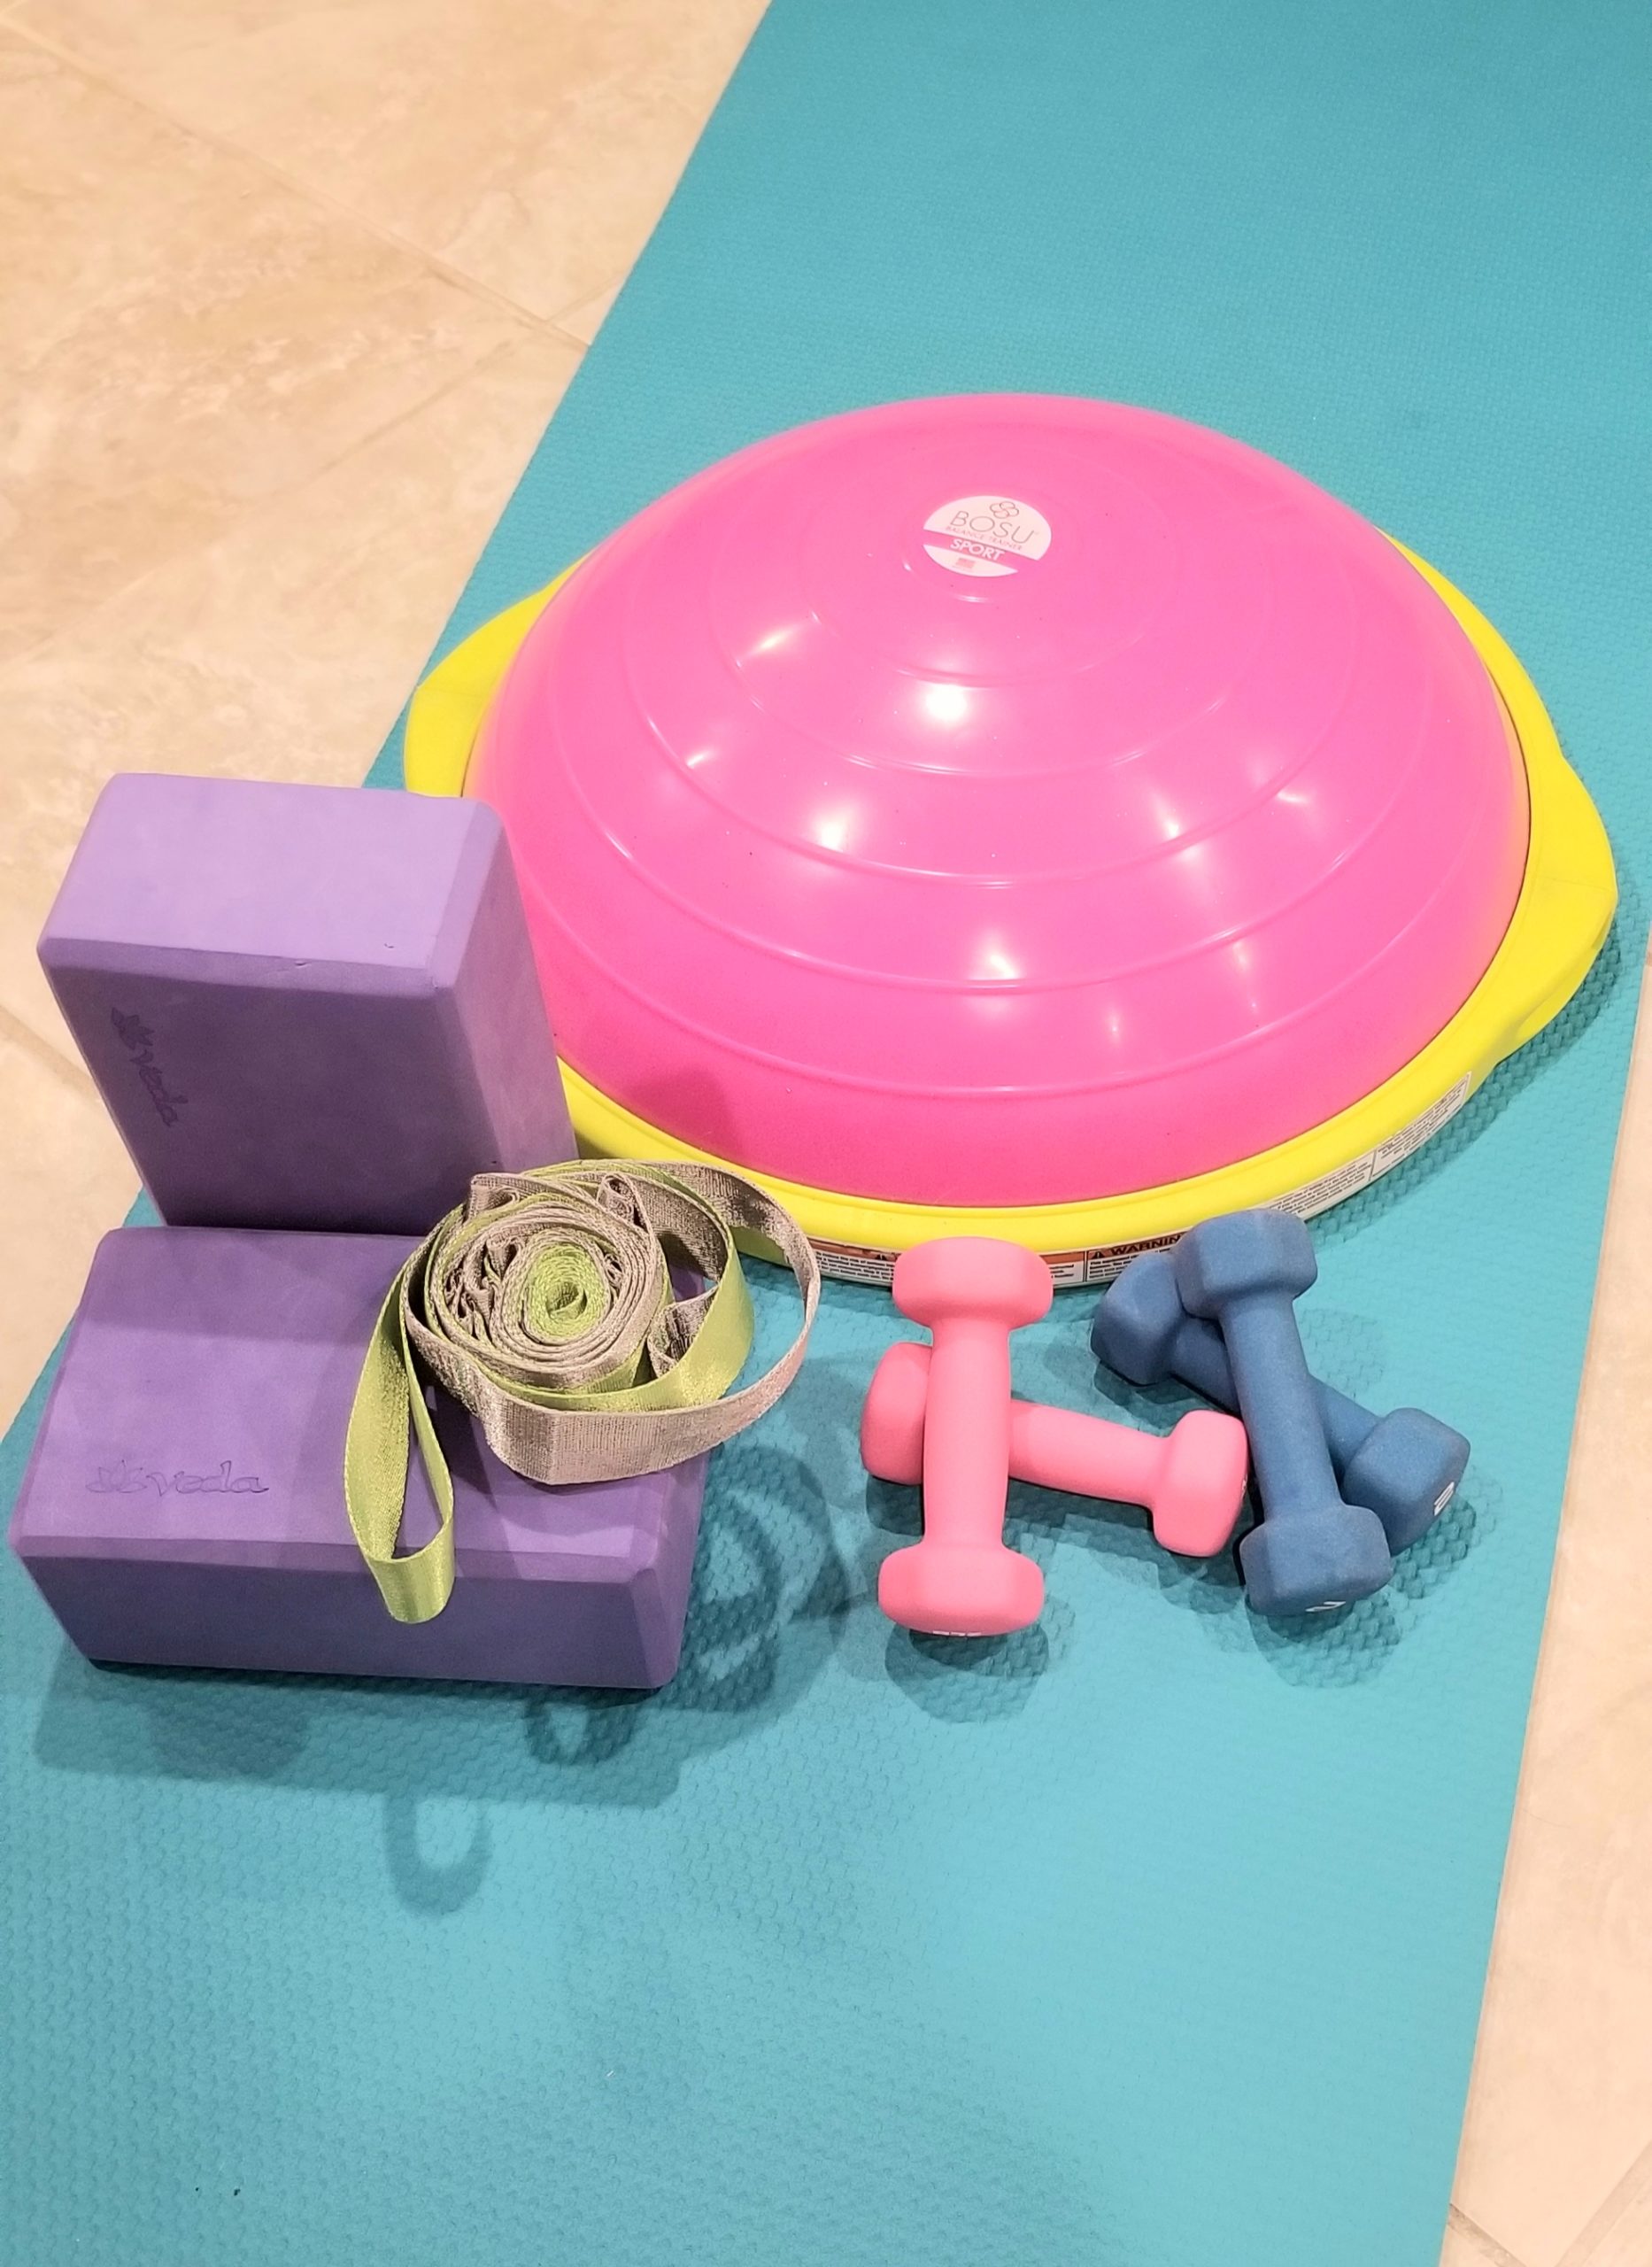 Tools for Dancers for At-Home Practice